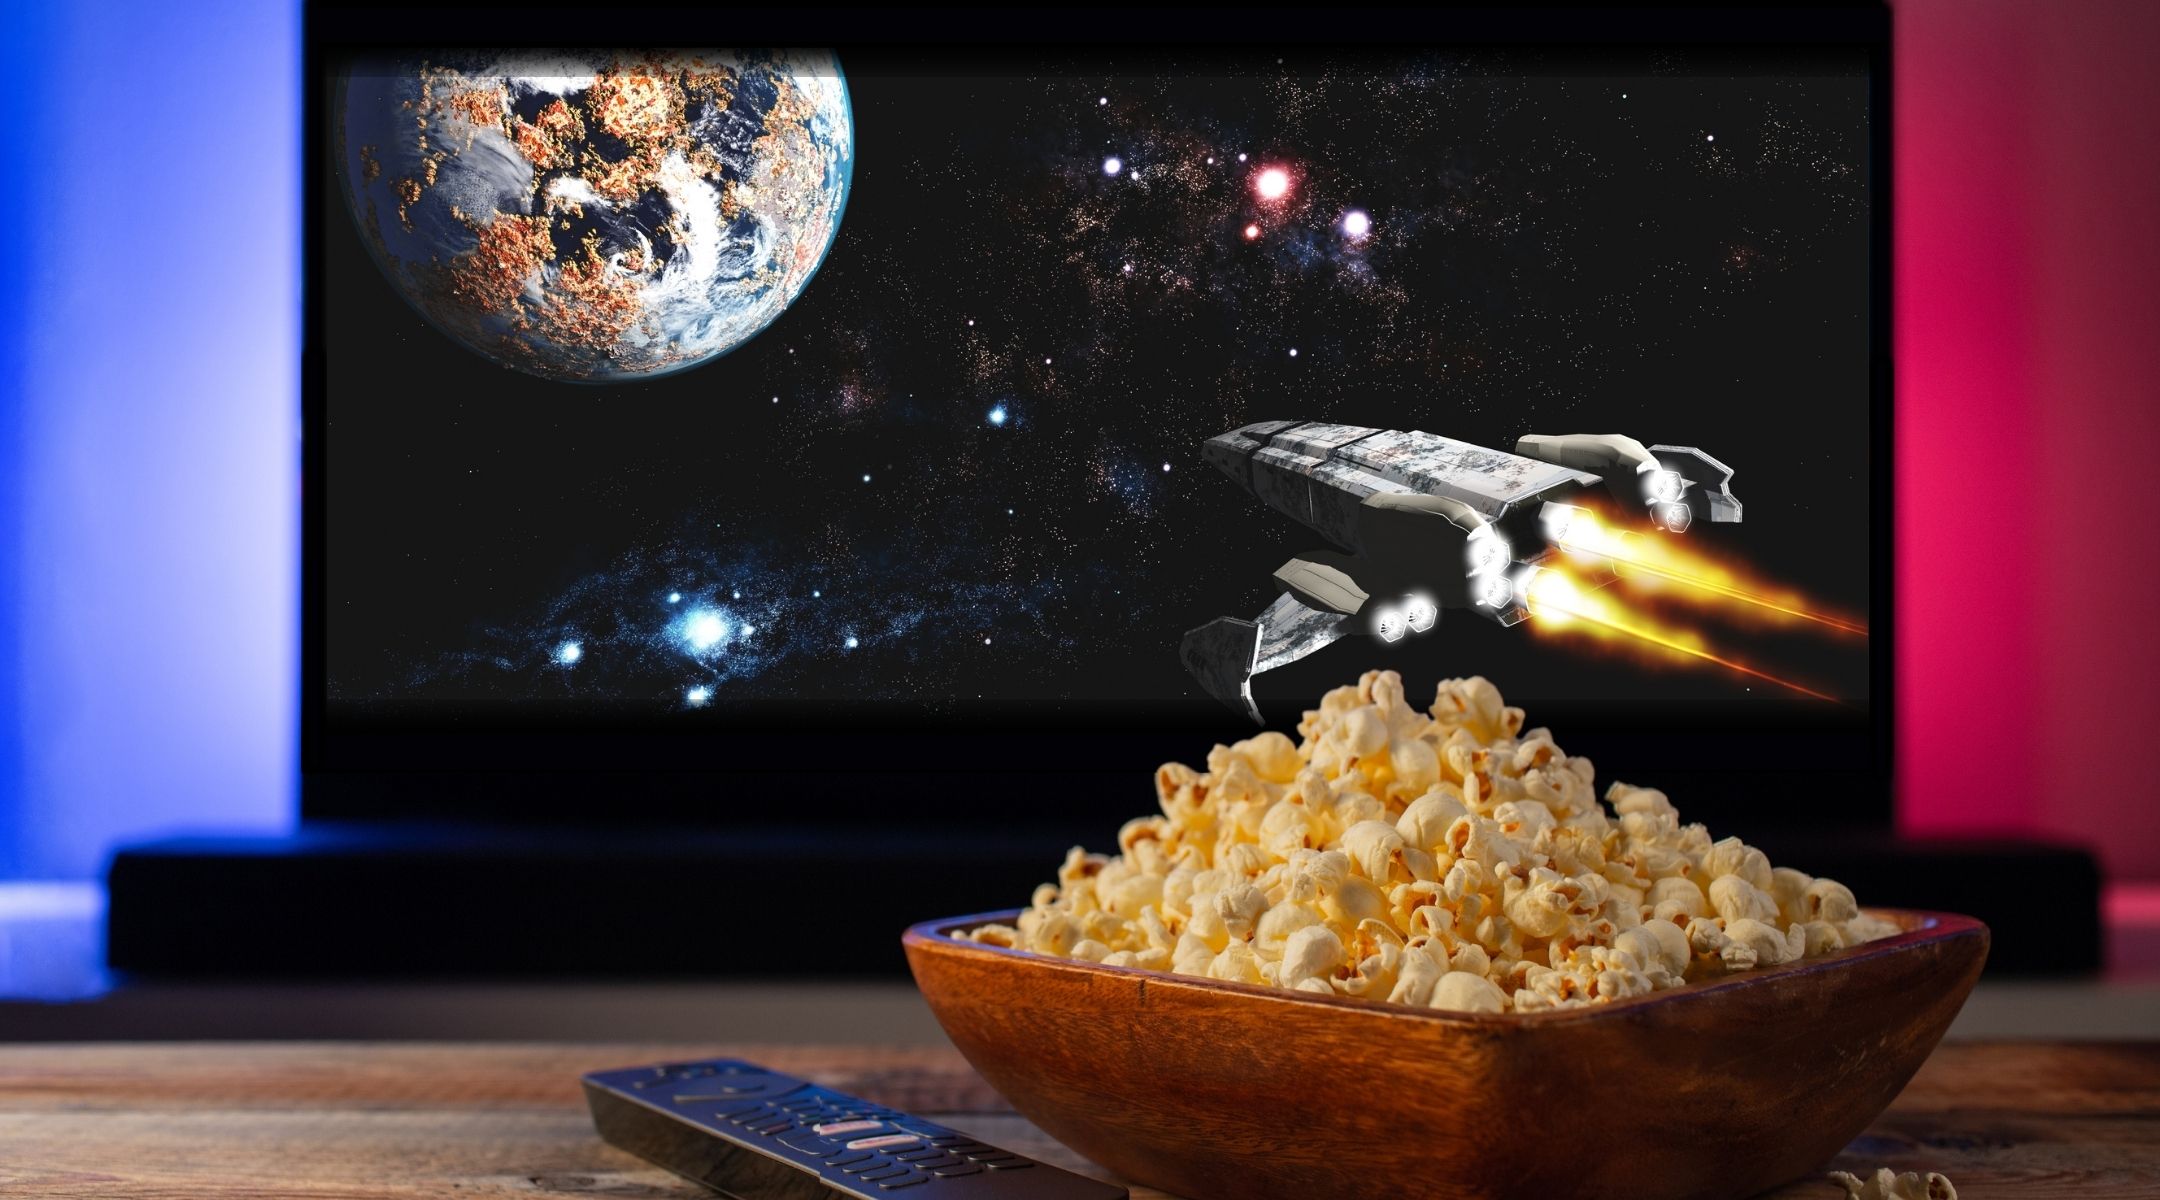 Top 10 Space Shows to Watch on Netflix